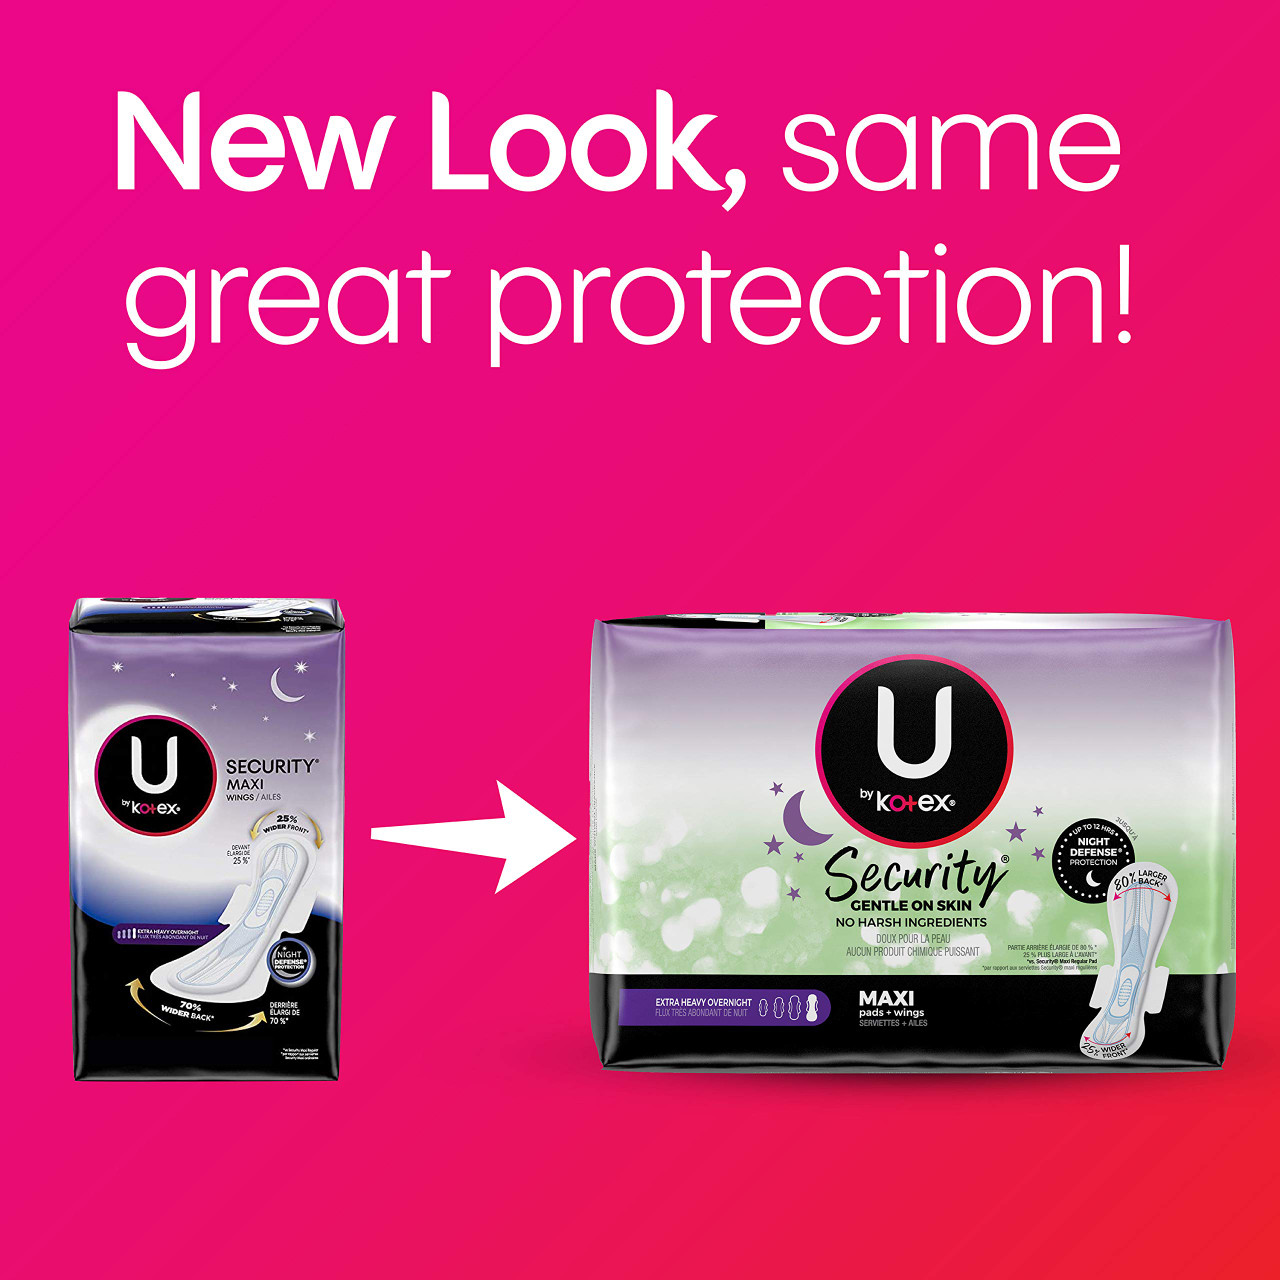 U by KOTEX® SECURITY* Thick Pads Overnight Wing